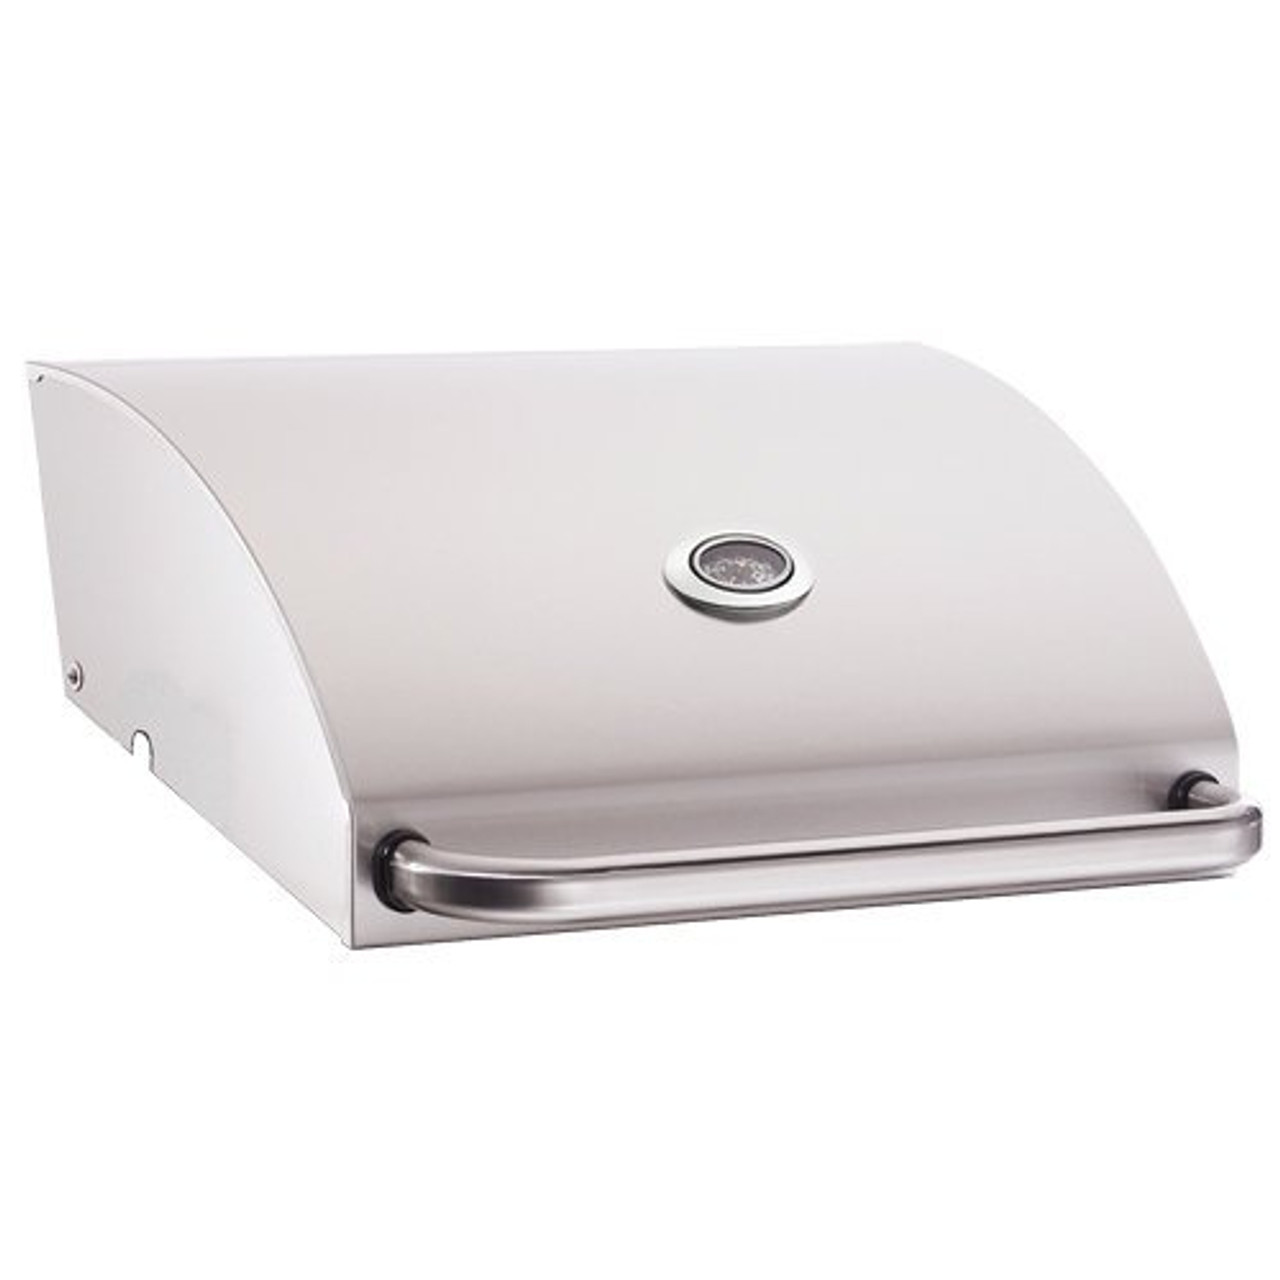 AOG Oven Hood Replacement Kit for 36 L Series Grills